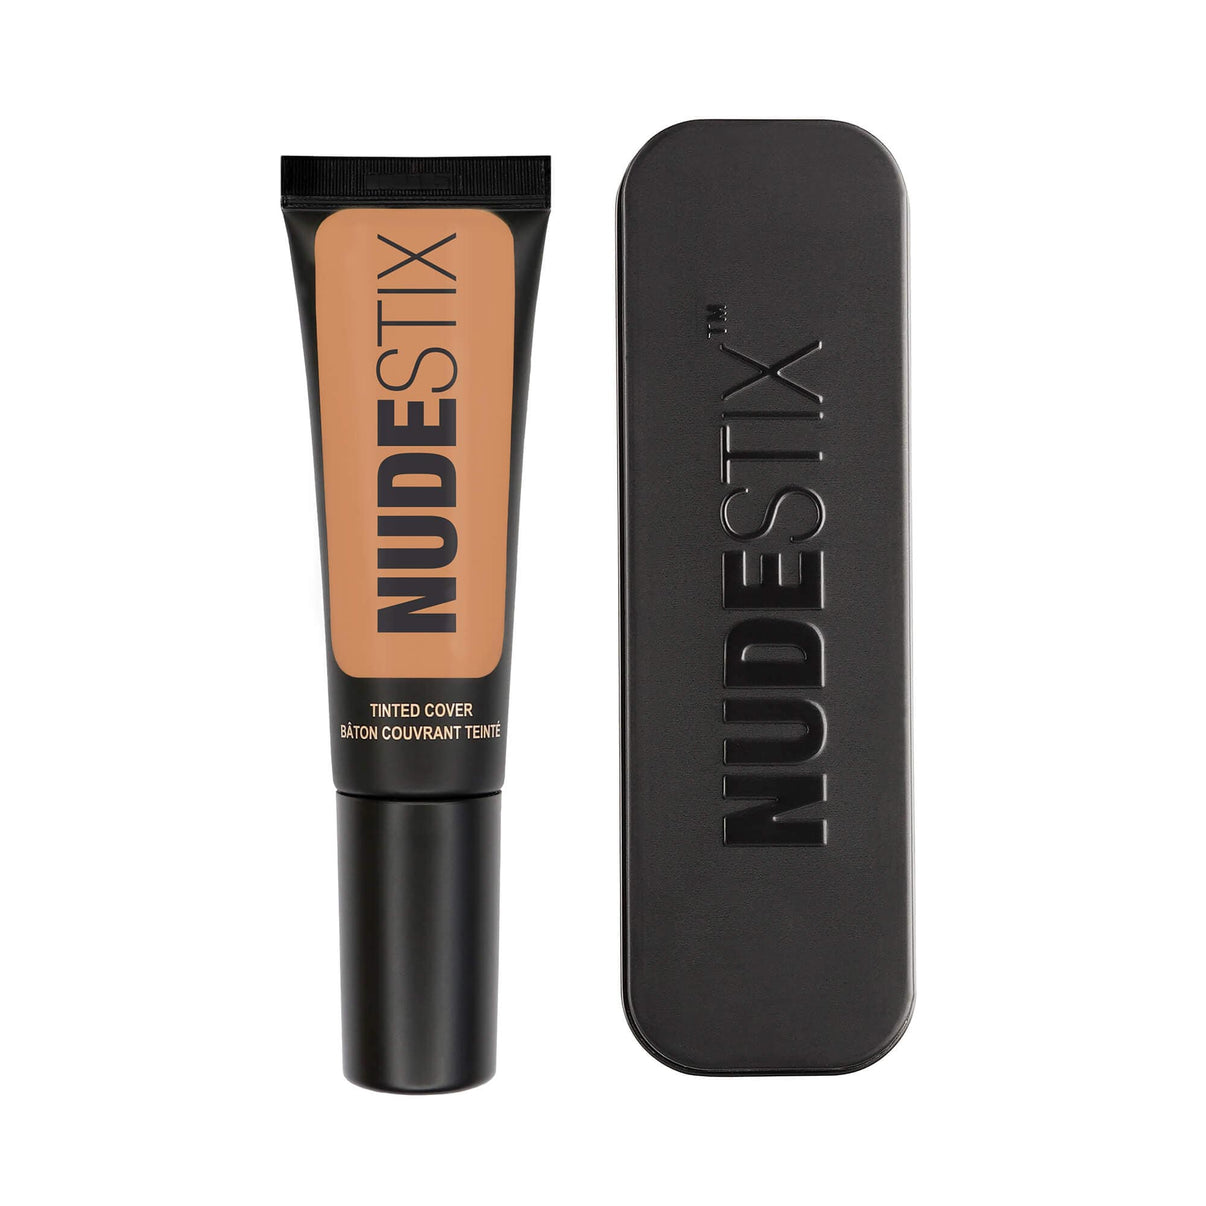 Tinted Cover Liquid Foundation in shade nude 6 with Nudestix can